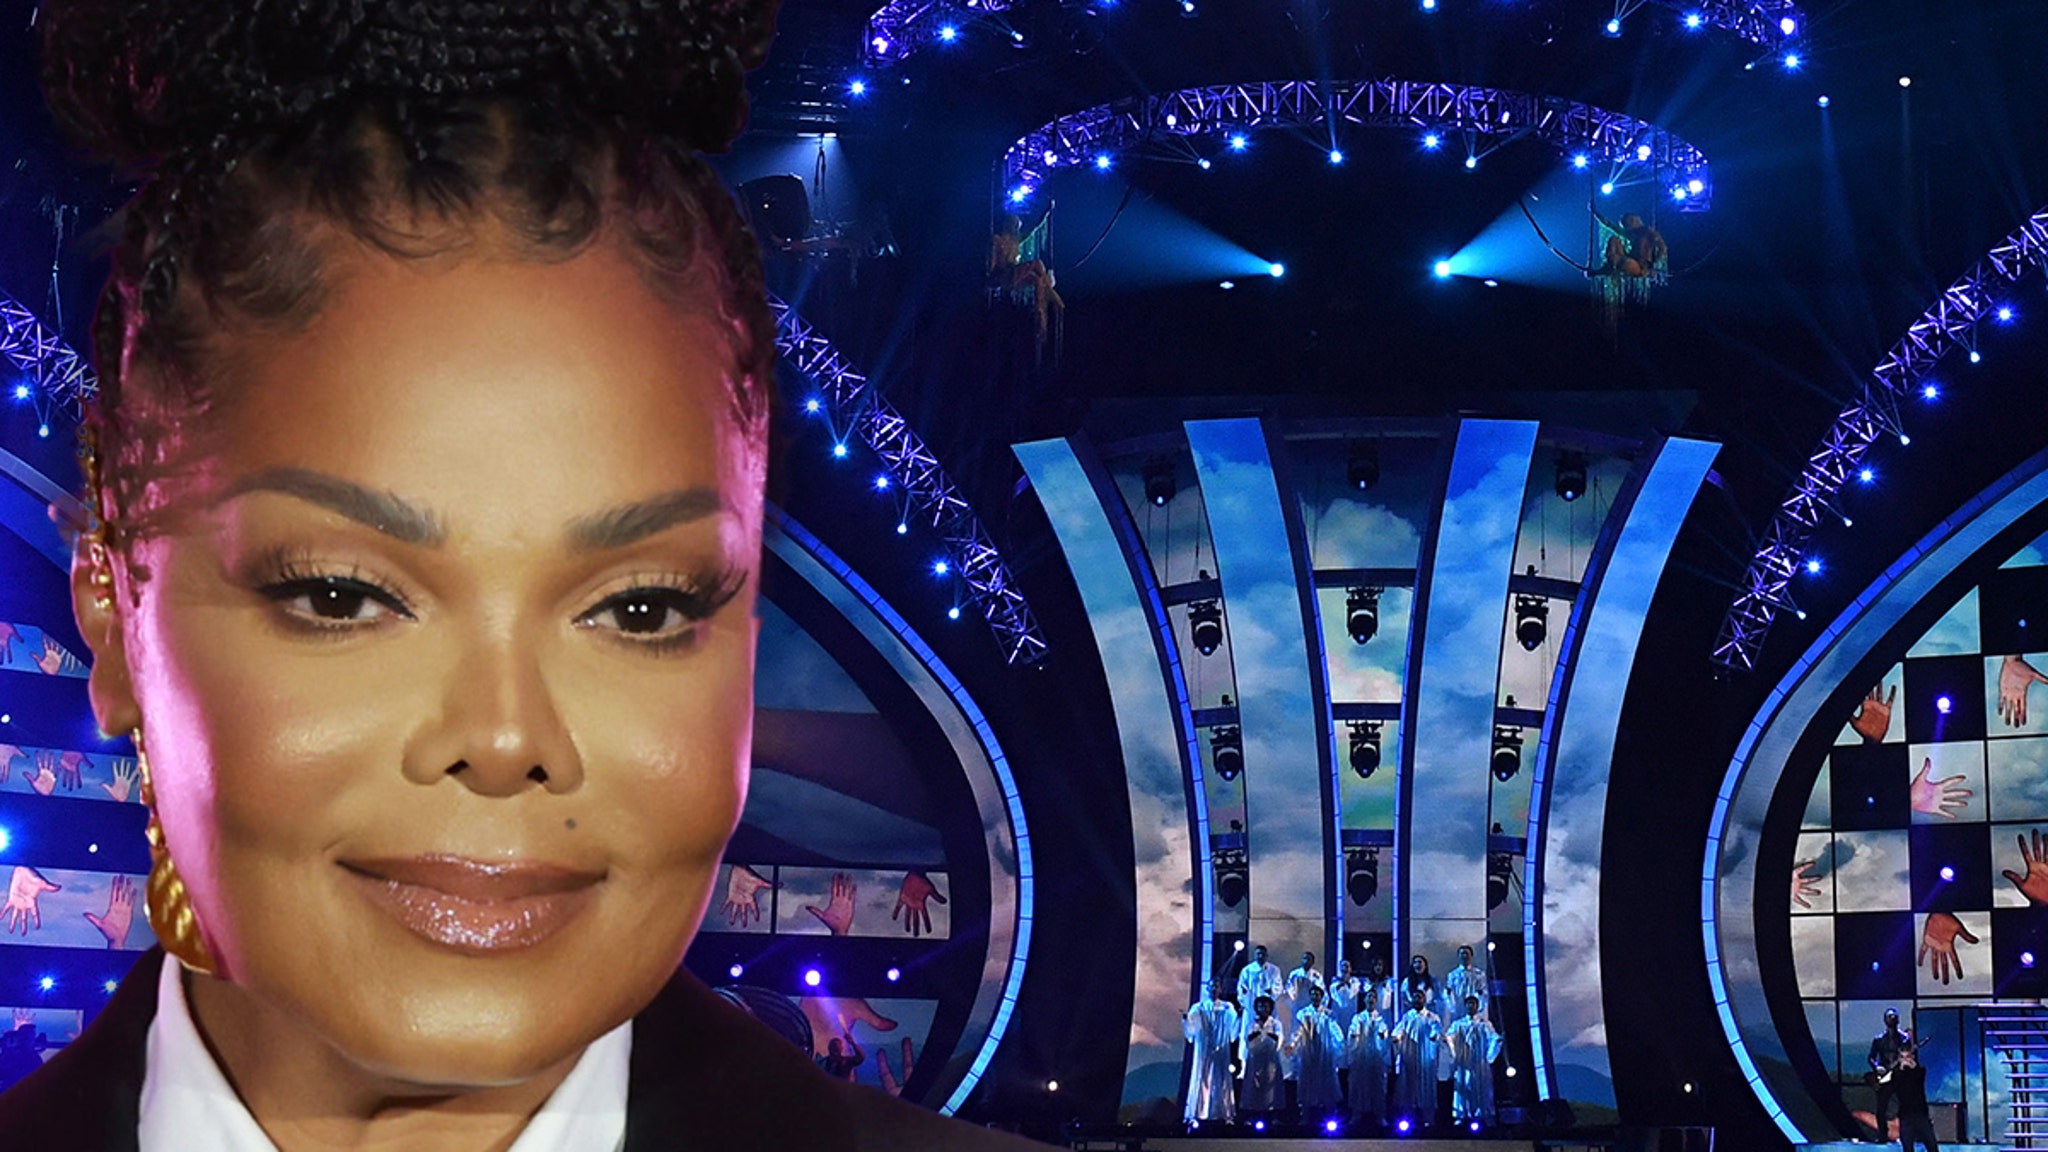 Janet Jackson Plans for Grammy Award Scrapped, Bad History with Super Bowl and CBS